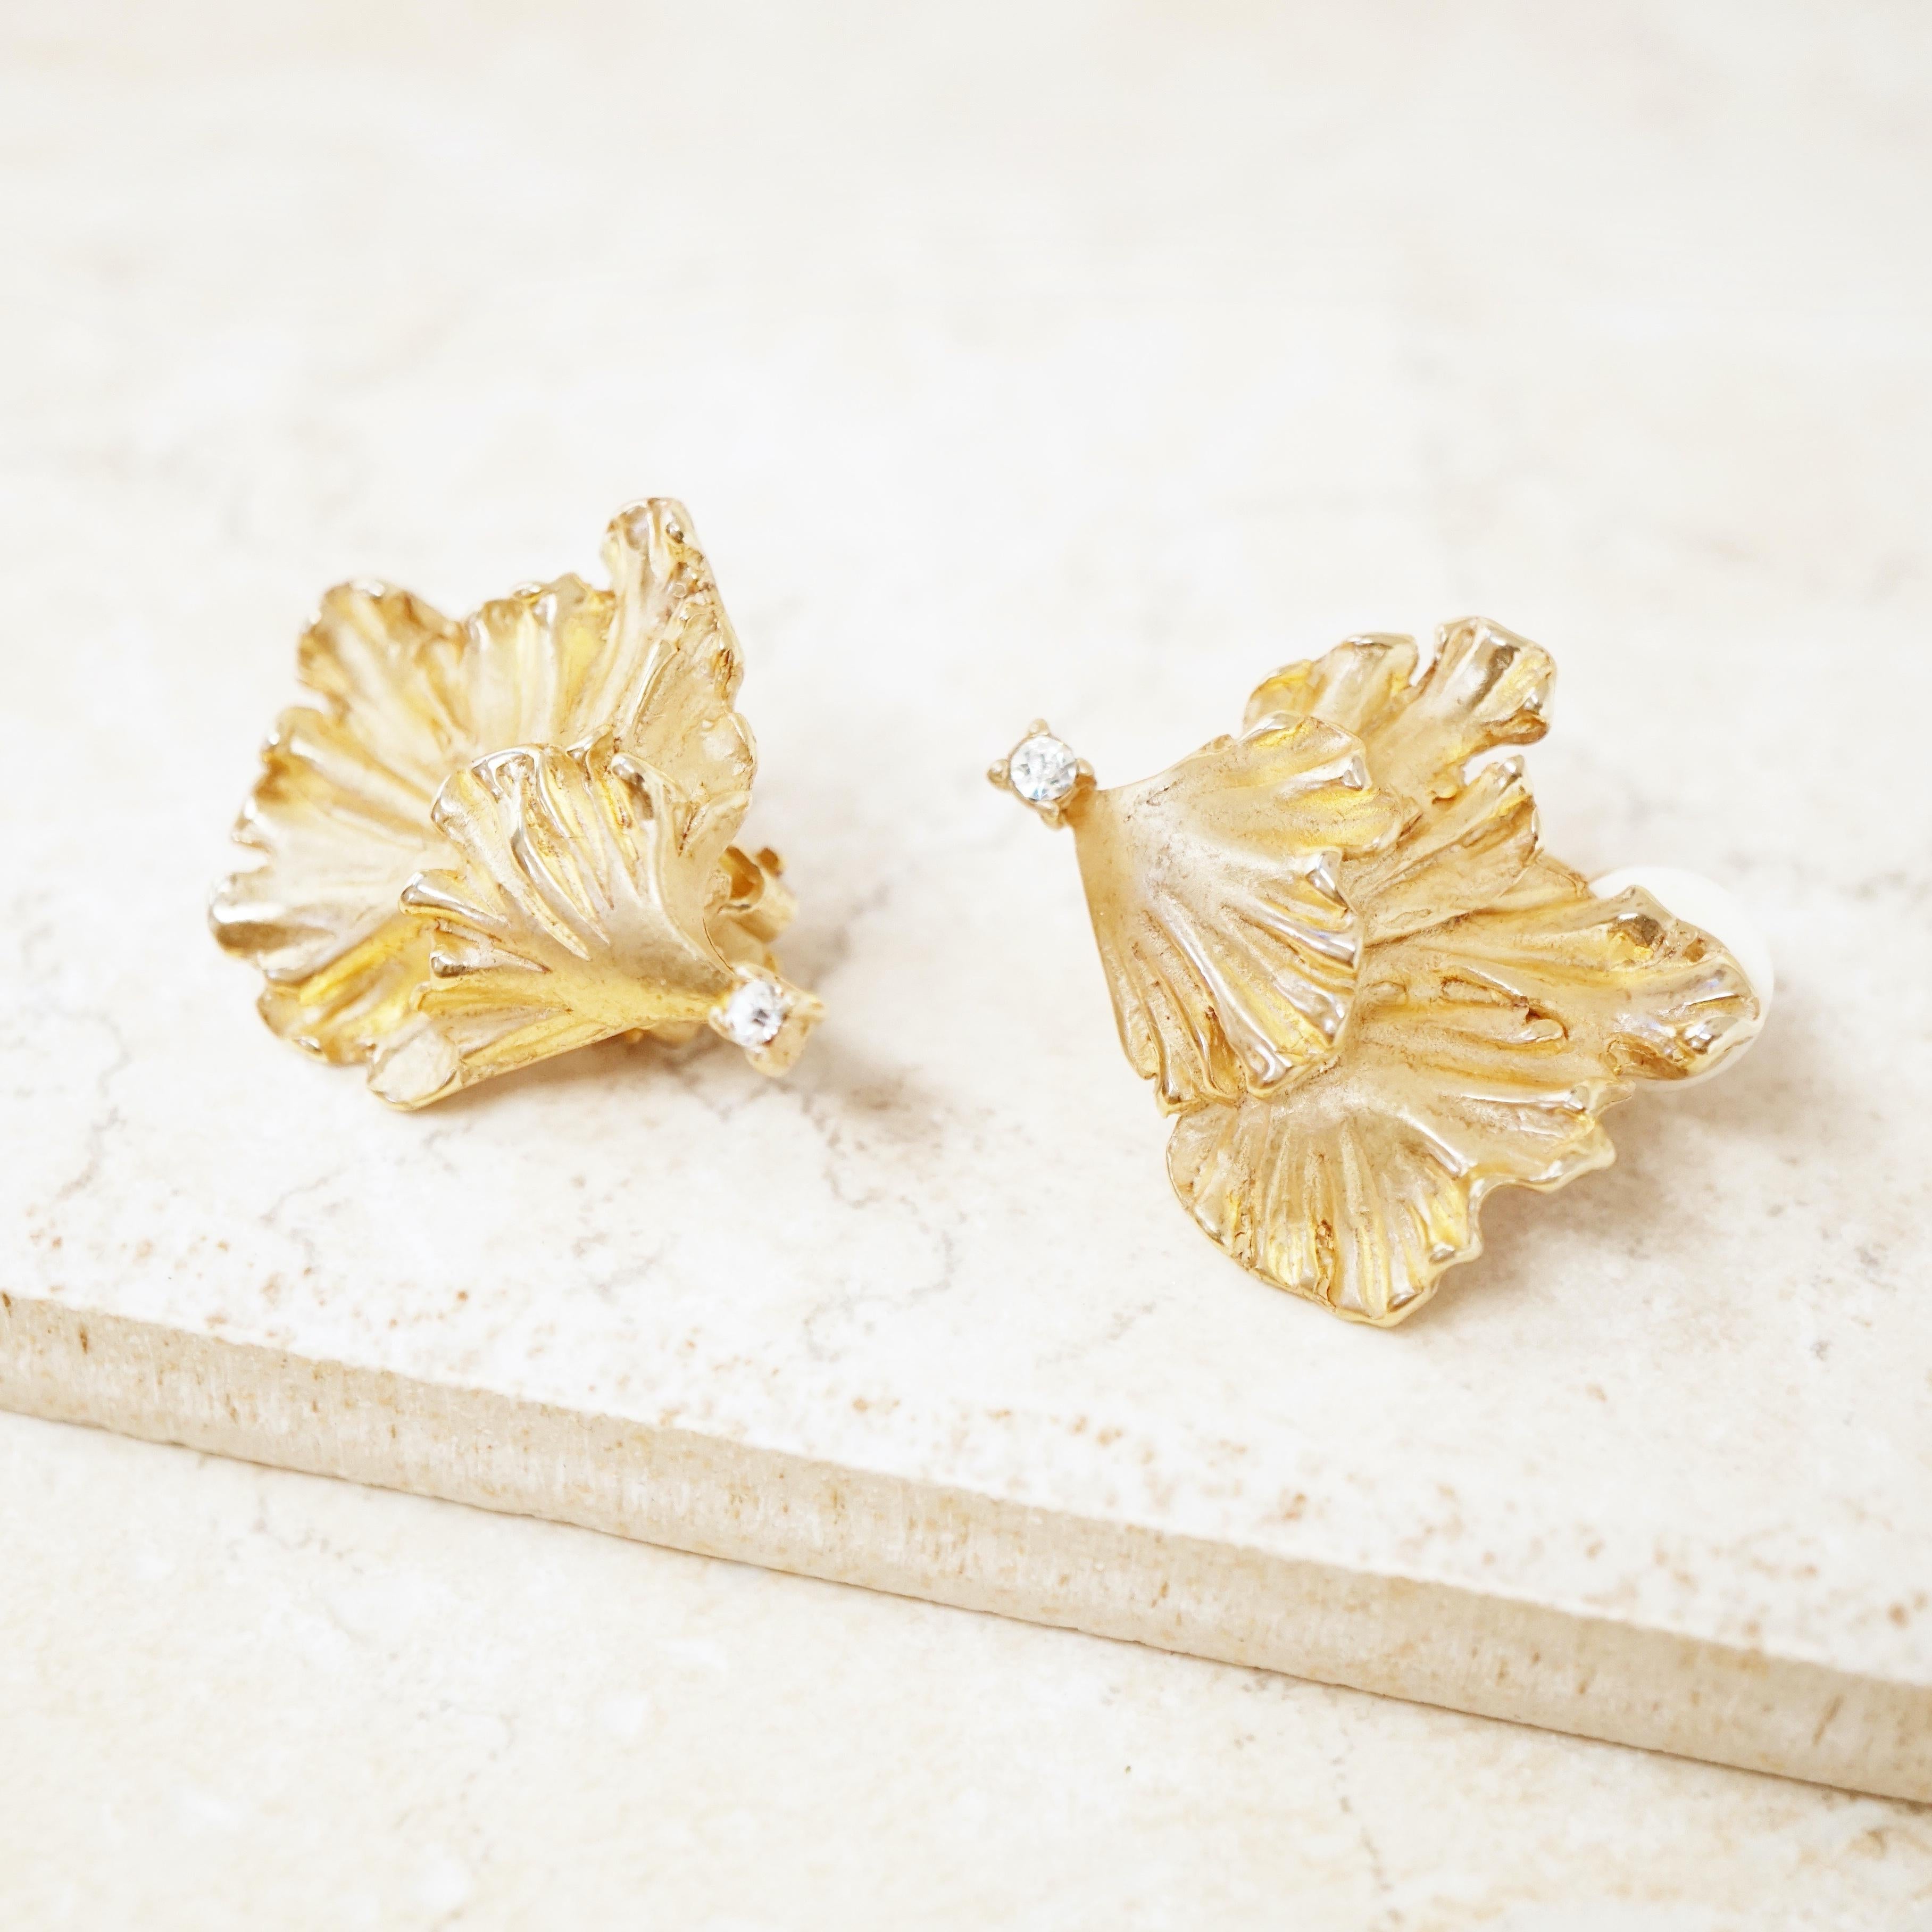 Modern Vintage Gilded Lily Pad Earrings with Crystal Rhinestones by Erwin Pearl, 1990s